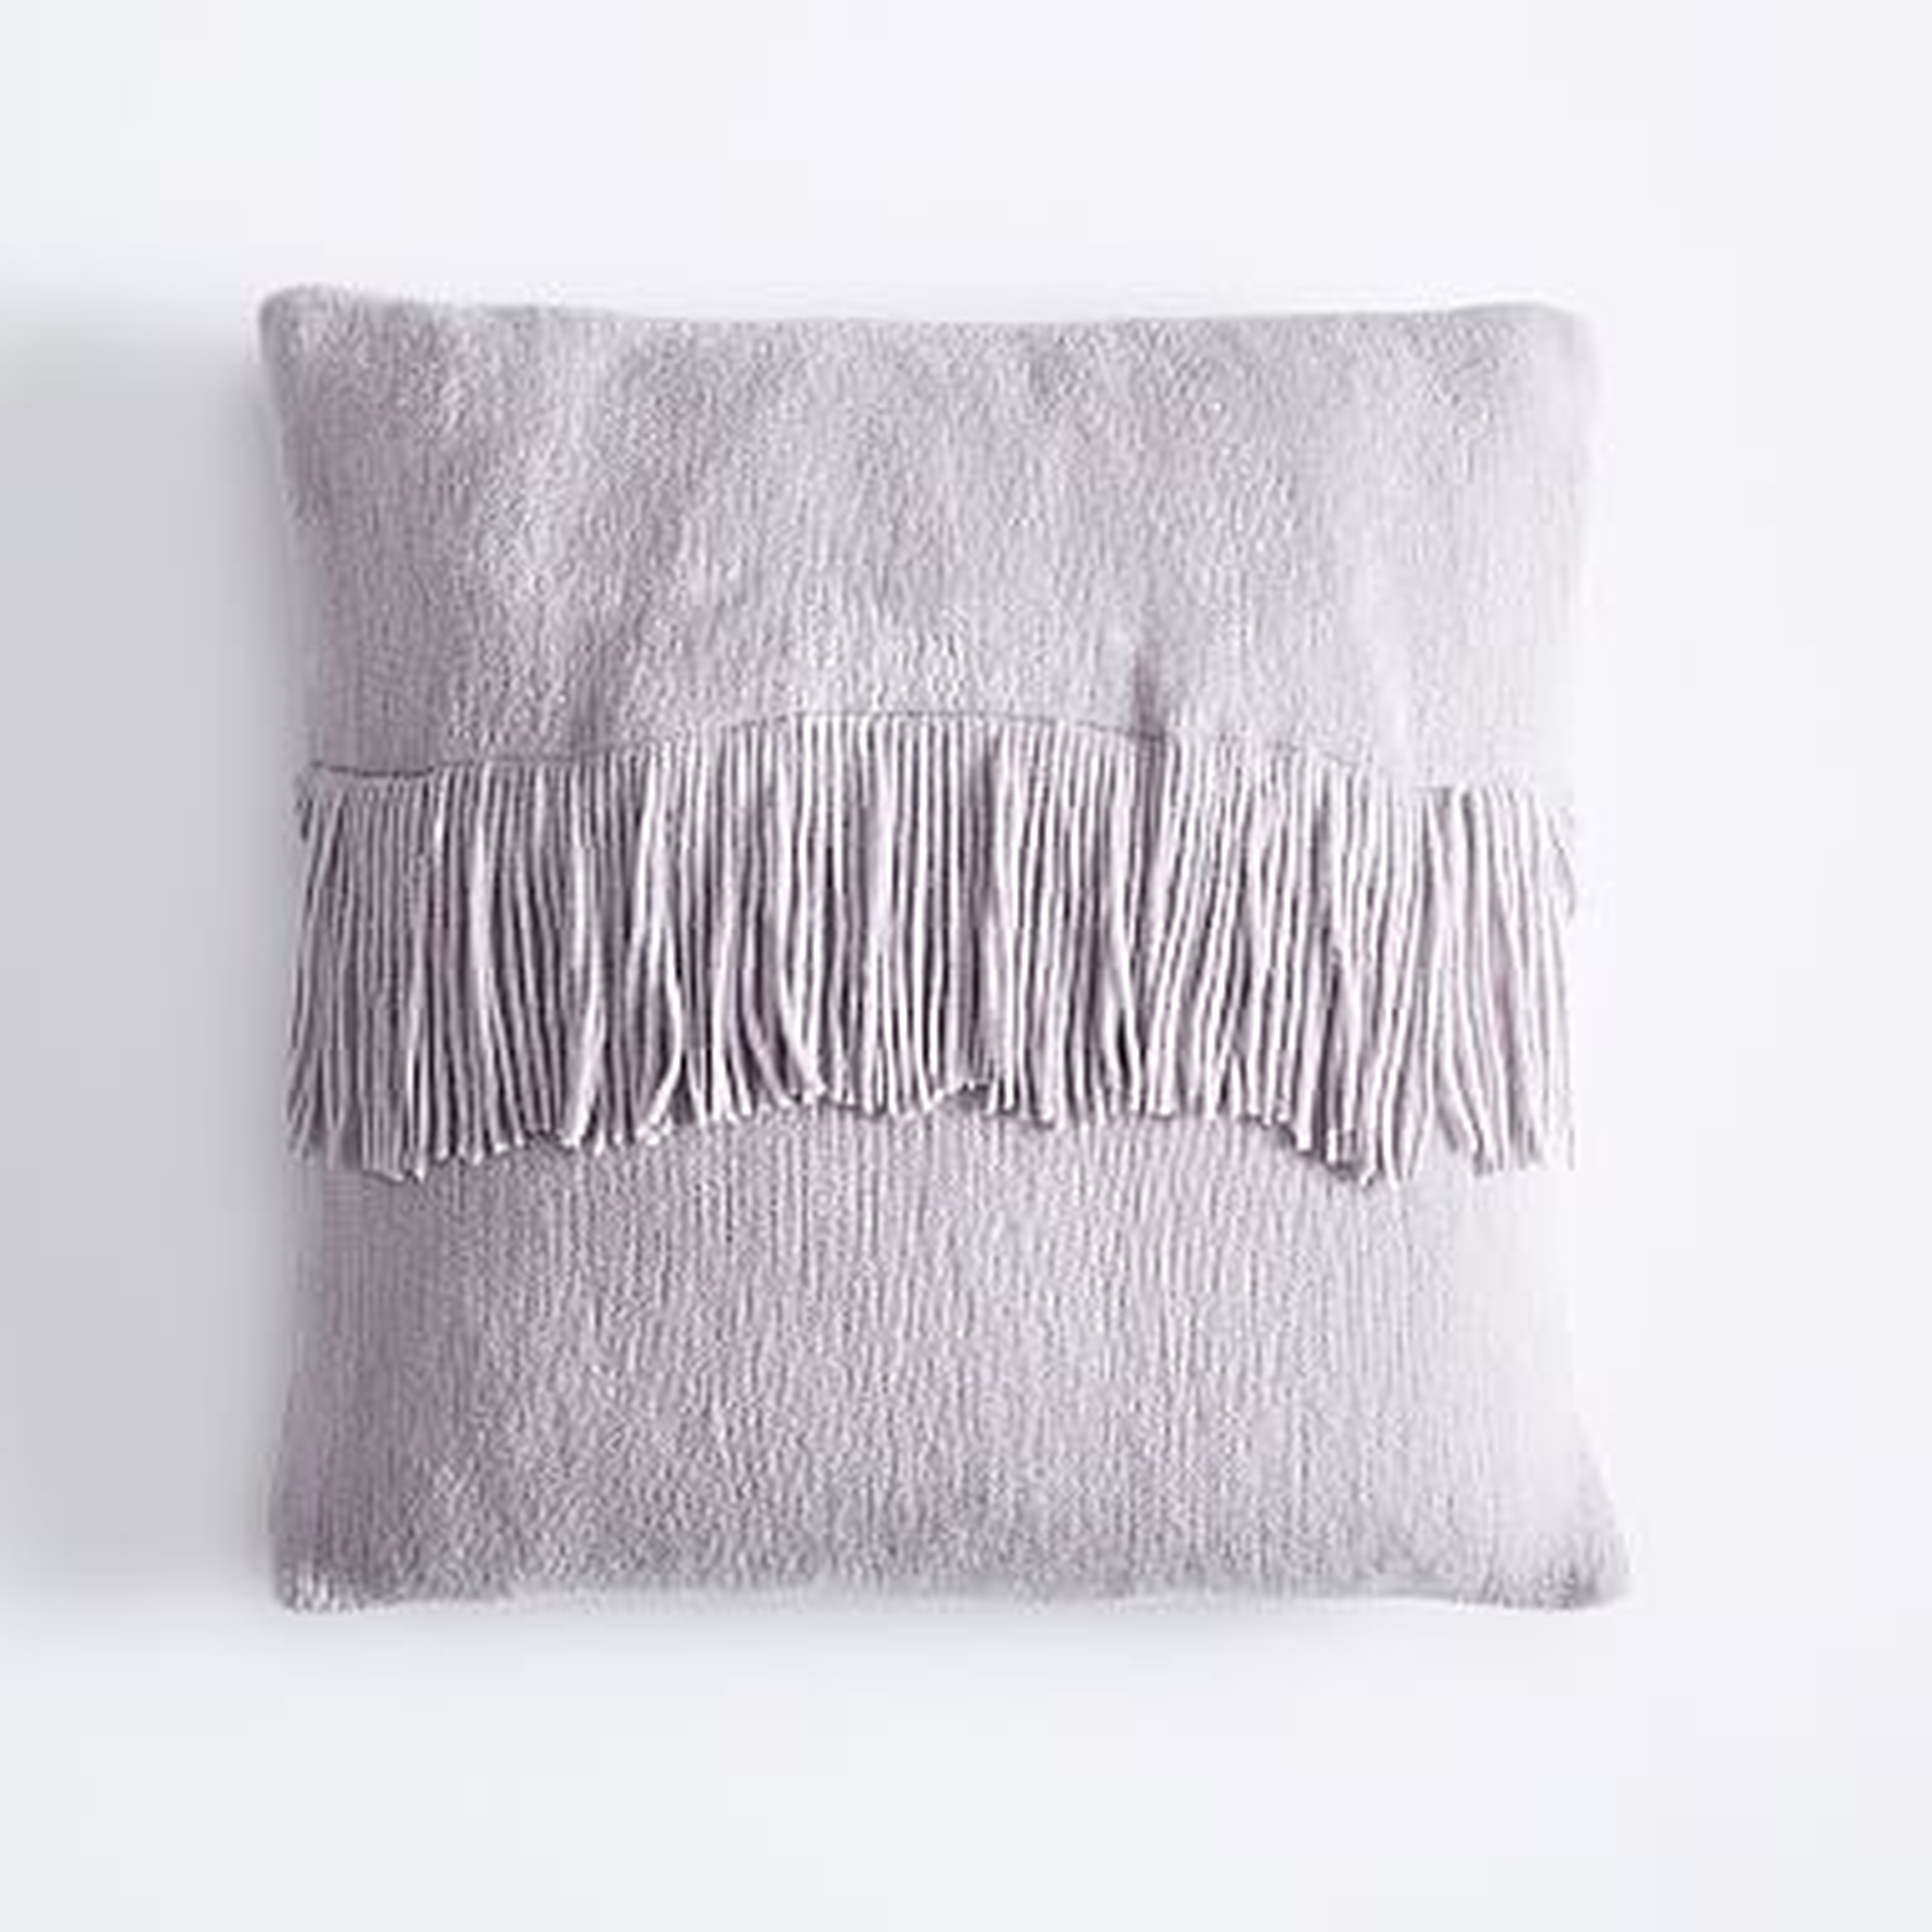 Chic Fringe Pillow Cover, 16x16, Dusty Lavender - Pottery Barn Teen